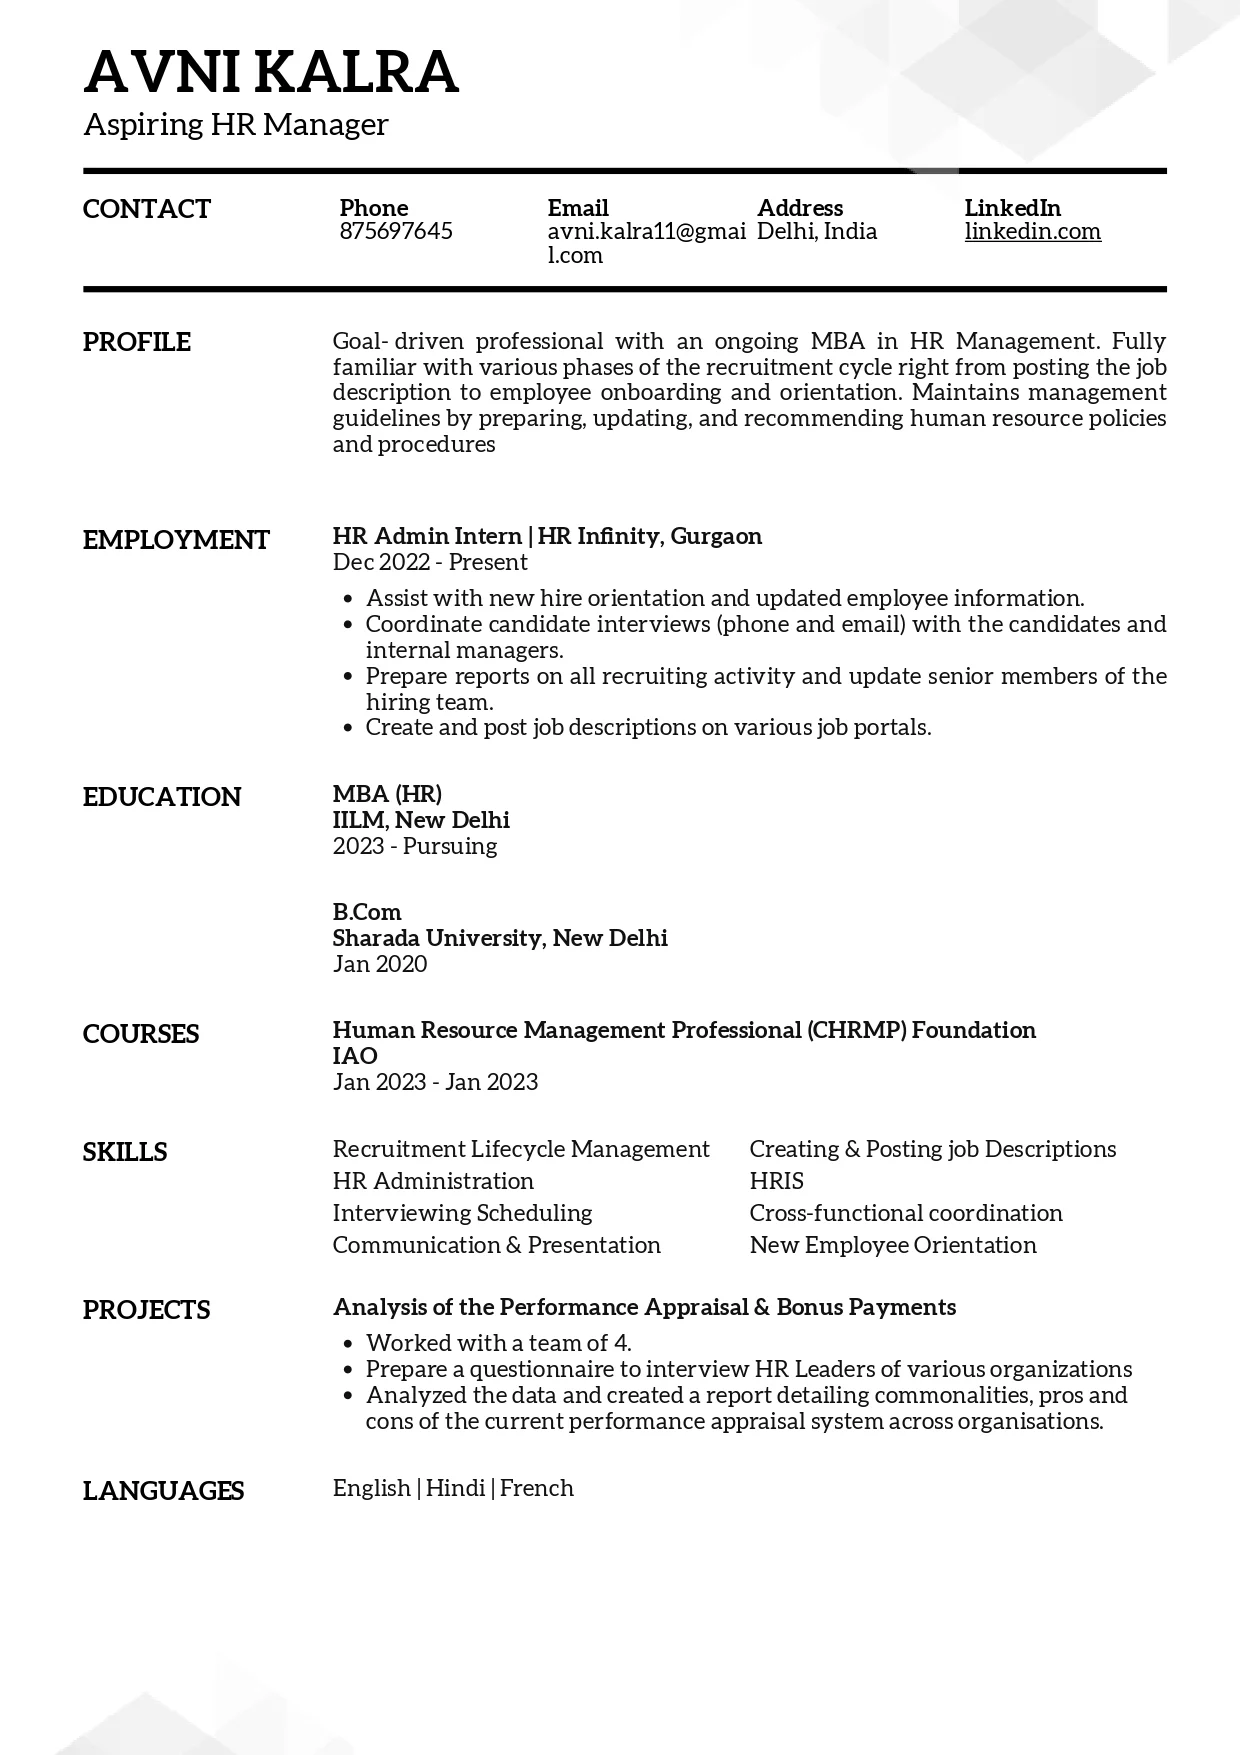 Sample Resume of MBA HR | Free Resume Templates & Samples on Resumod.co